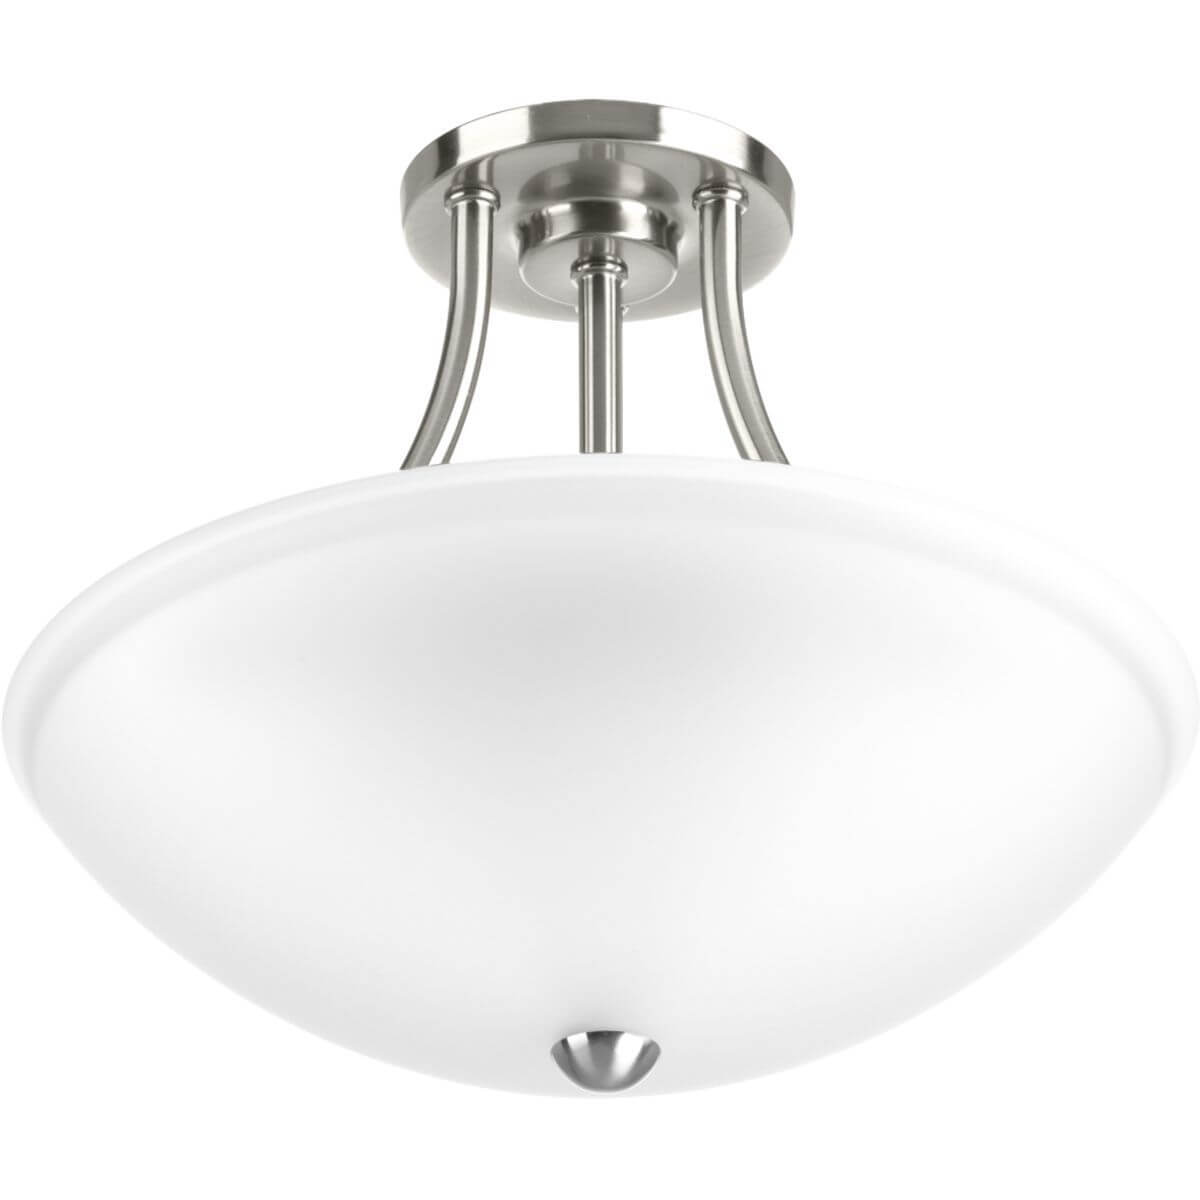 Progress Lighting Gather 1 Light 13 inch LED Semi-Flush Convertible to Pendant in Brushed Nickel with Etched Diffuser P350088-009-30